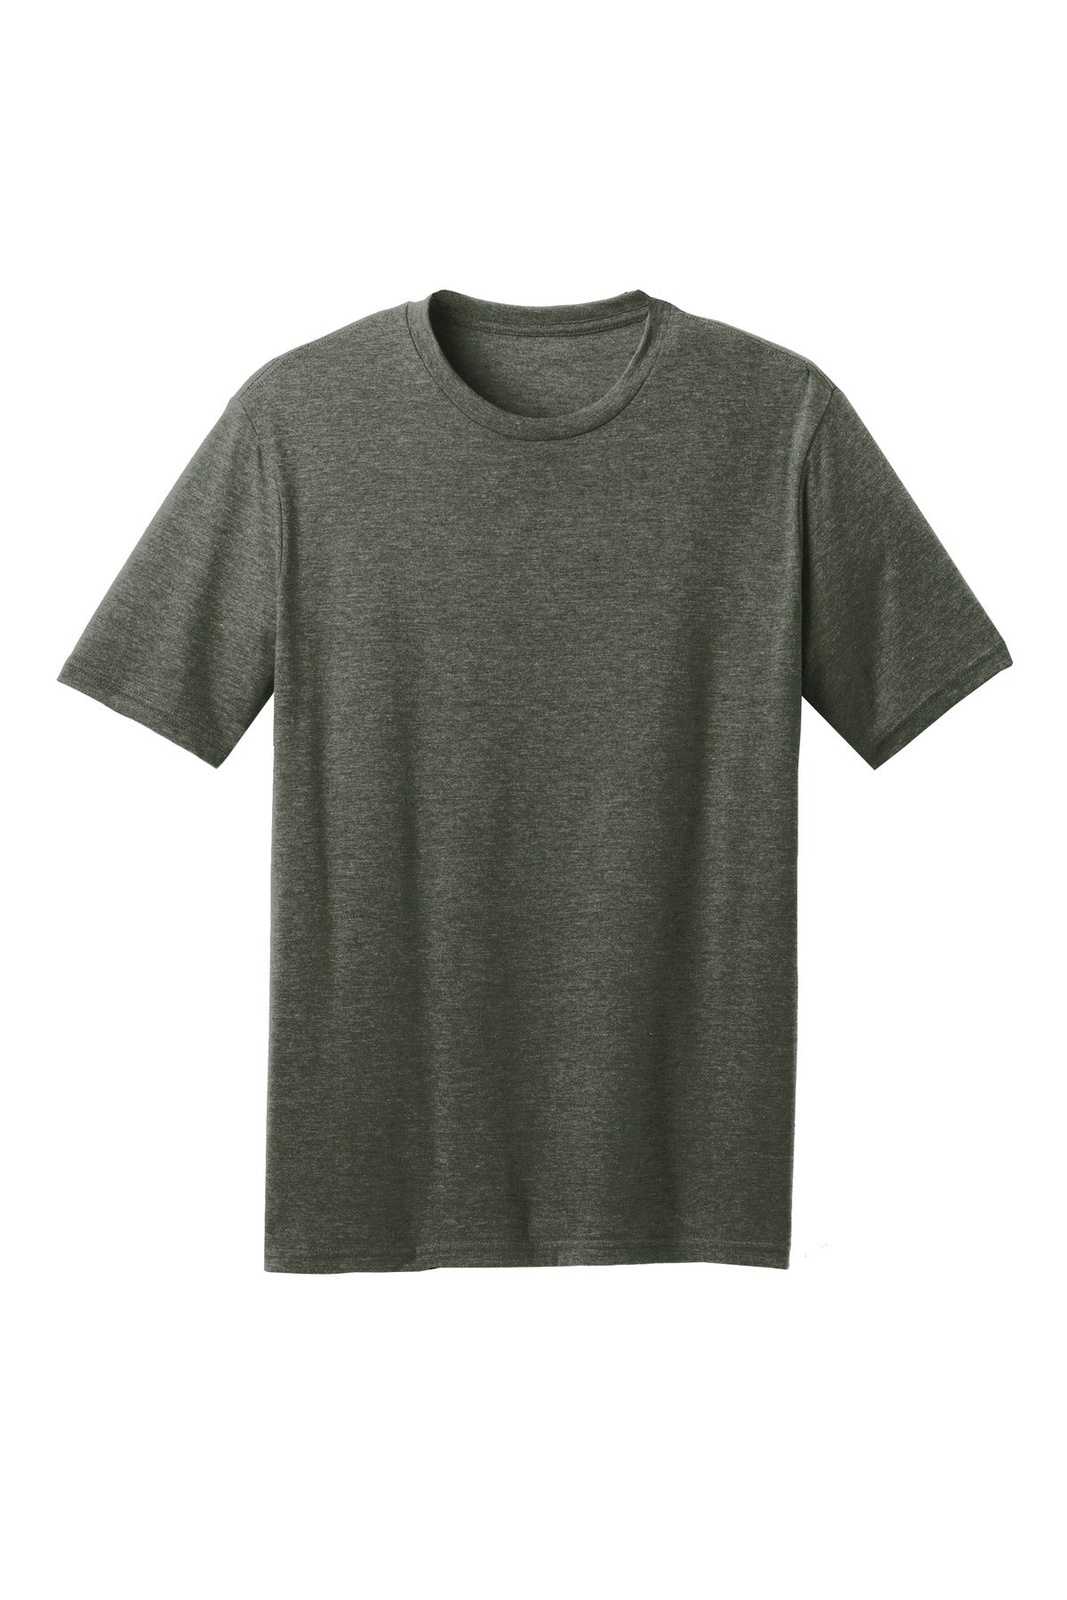 District DM108 Perfect Blend Tee - Heathered Olive - HIT a Double - 5